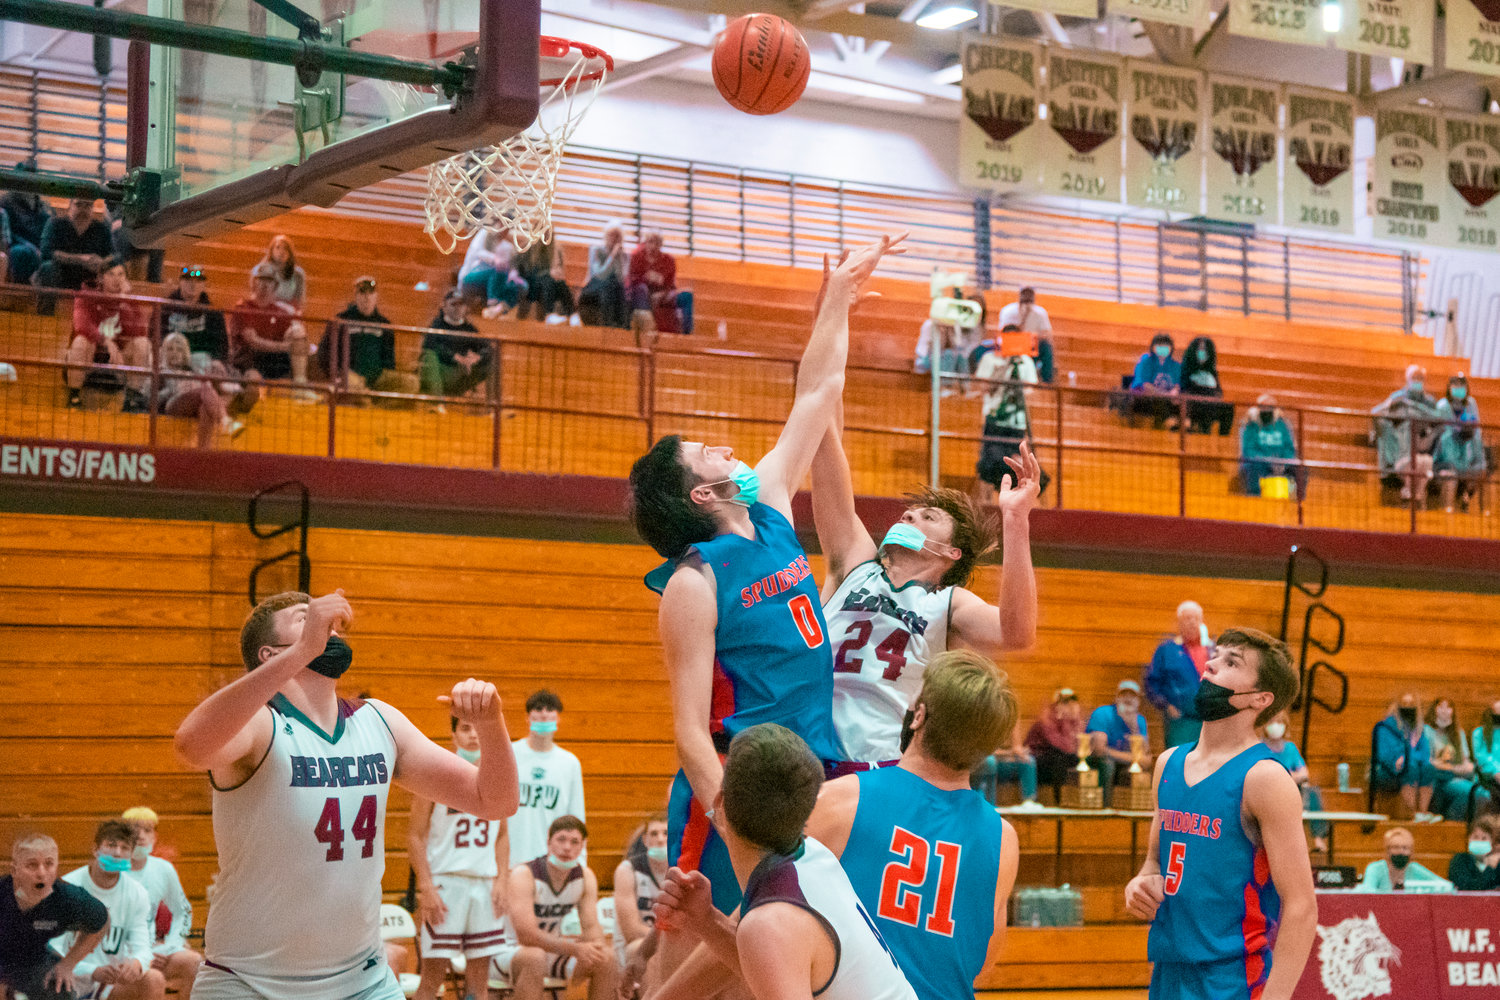 W.F. West's Carter McCoy (24) makes a shot over Ridgefield's Carson Knight (0) to put the Bearcats up in the final moments of the game Wednesday night.